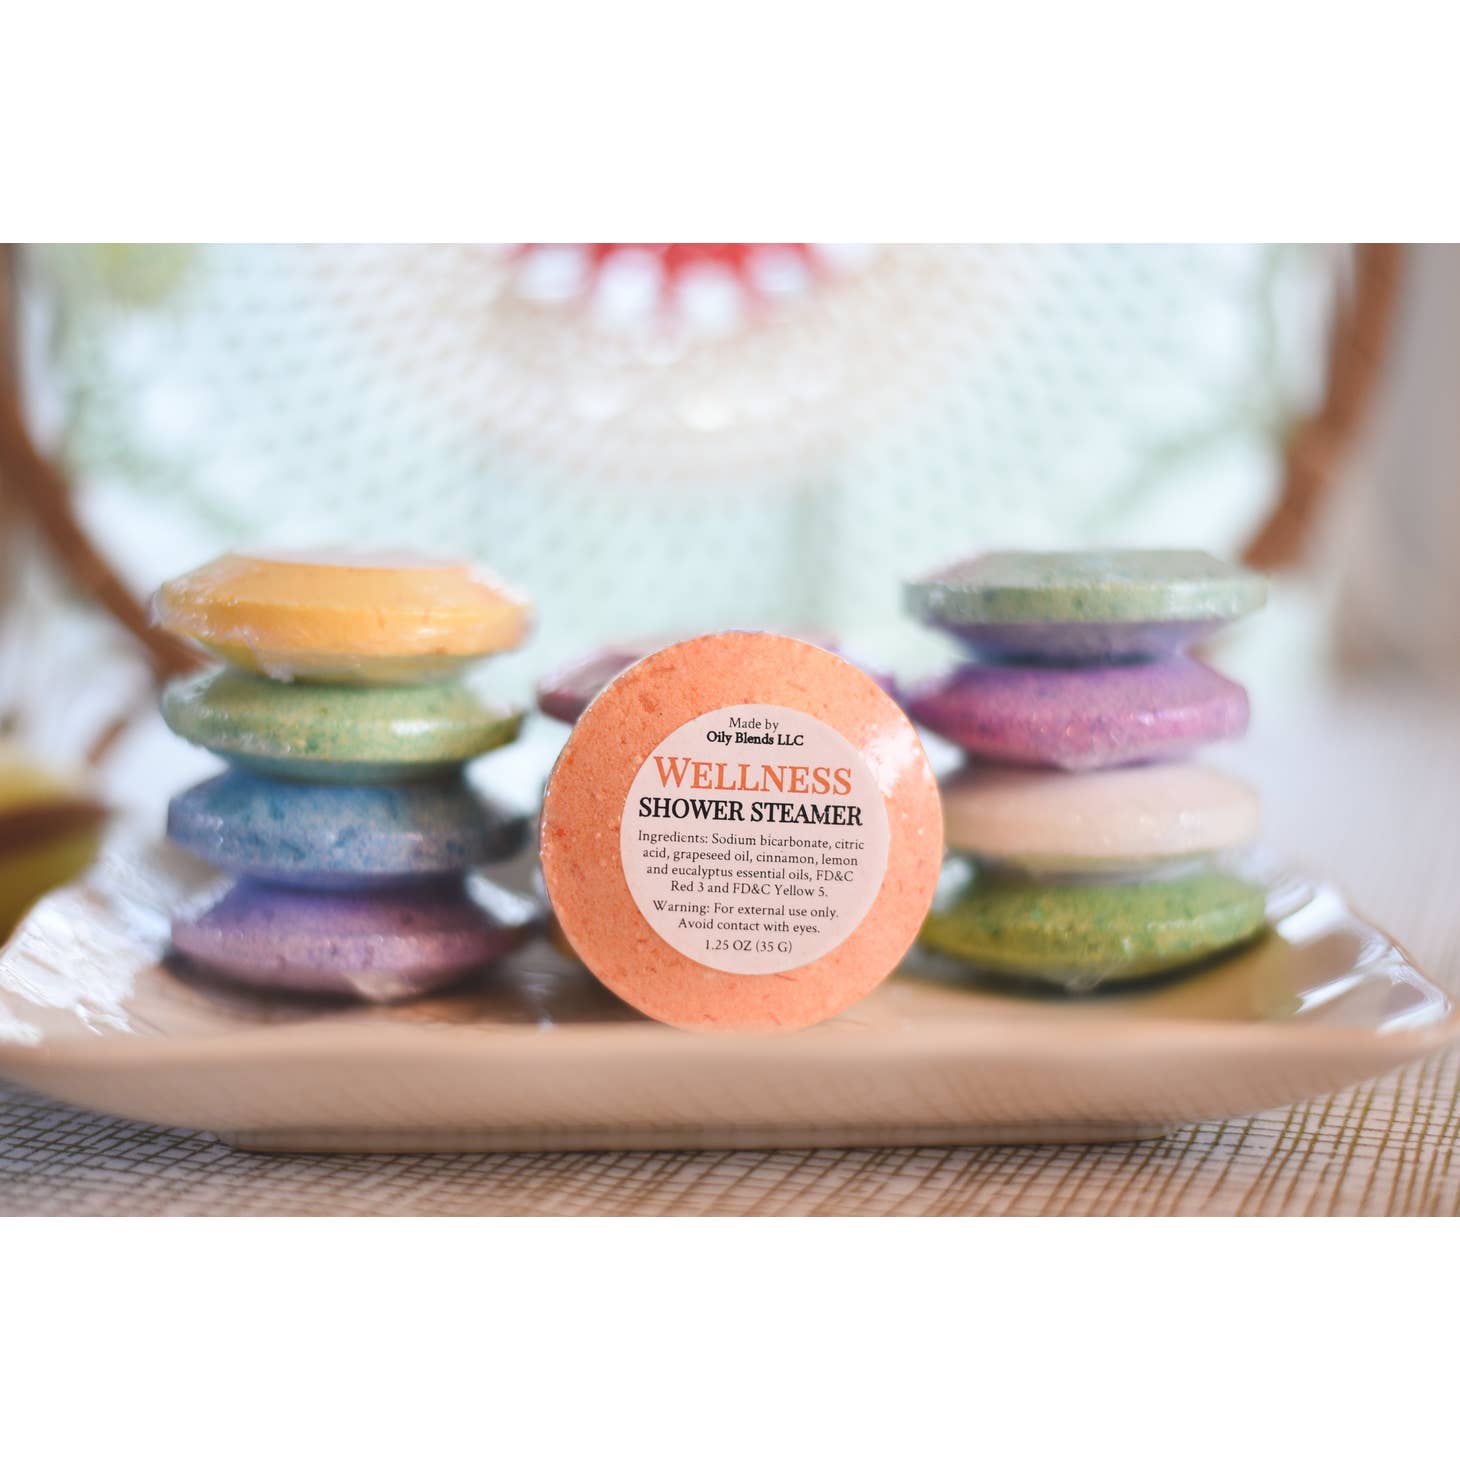 Shop Favorite Shower Steamers-Bath Additives at Ruby Joy Boutique, a Women's Clothing Store in Pickerington, Ohio